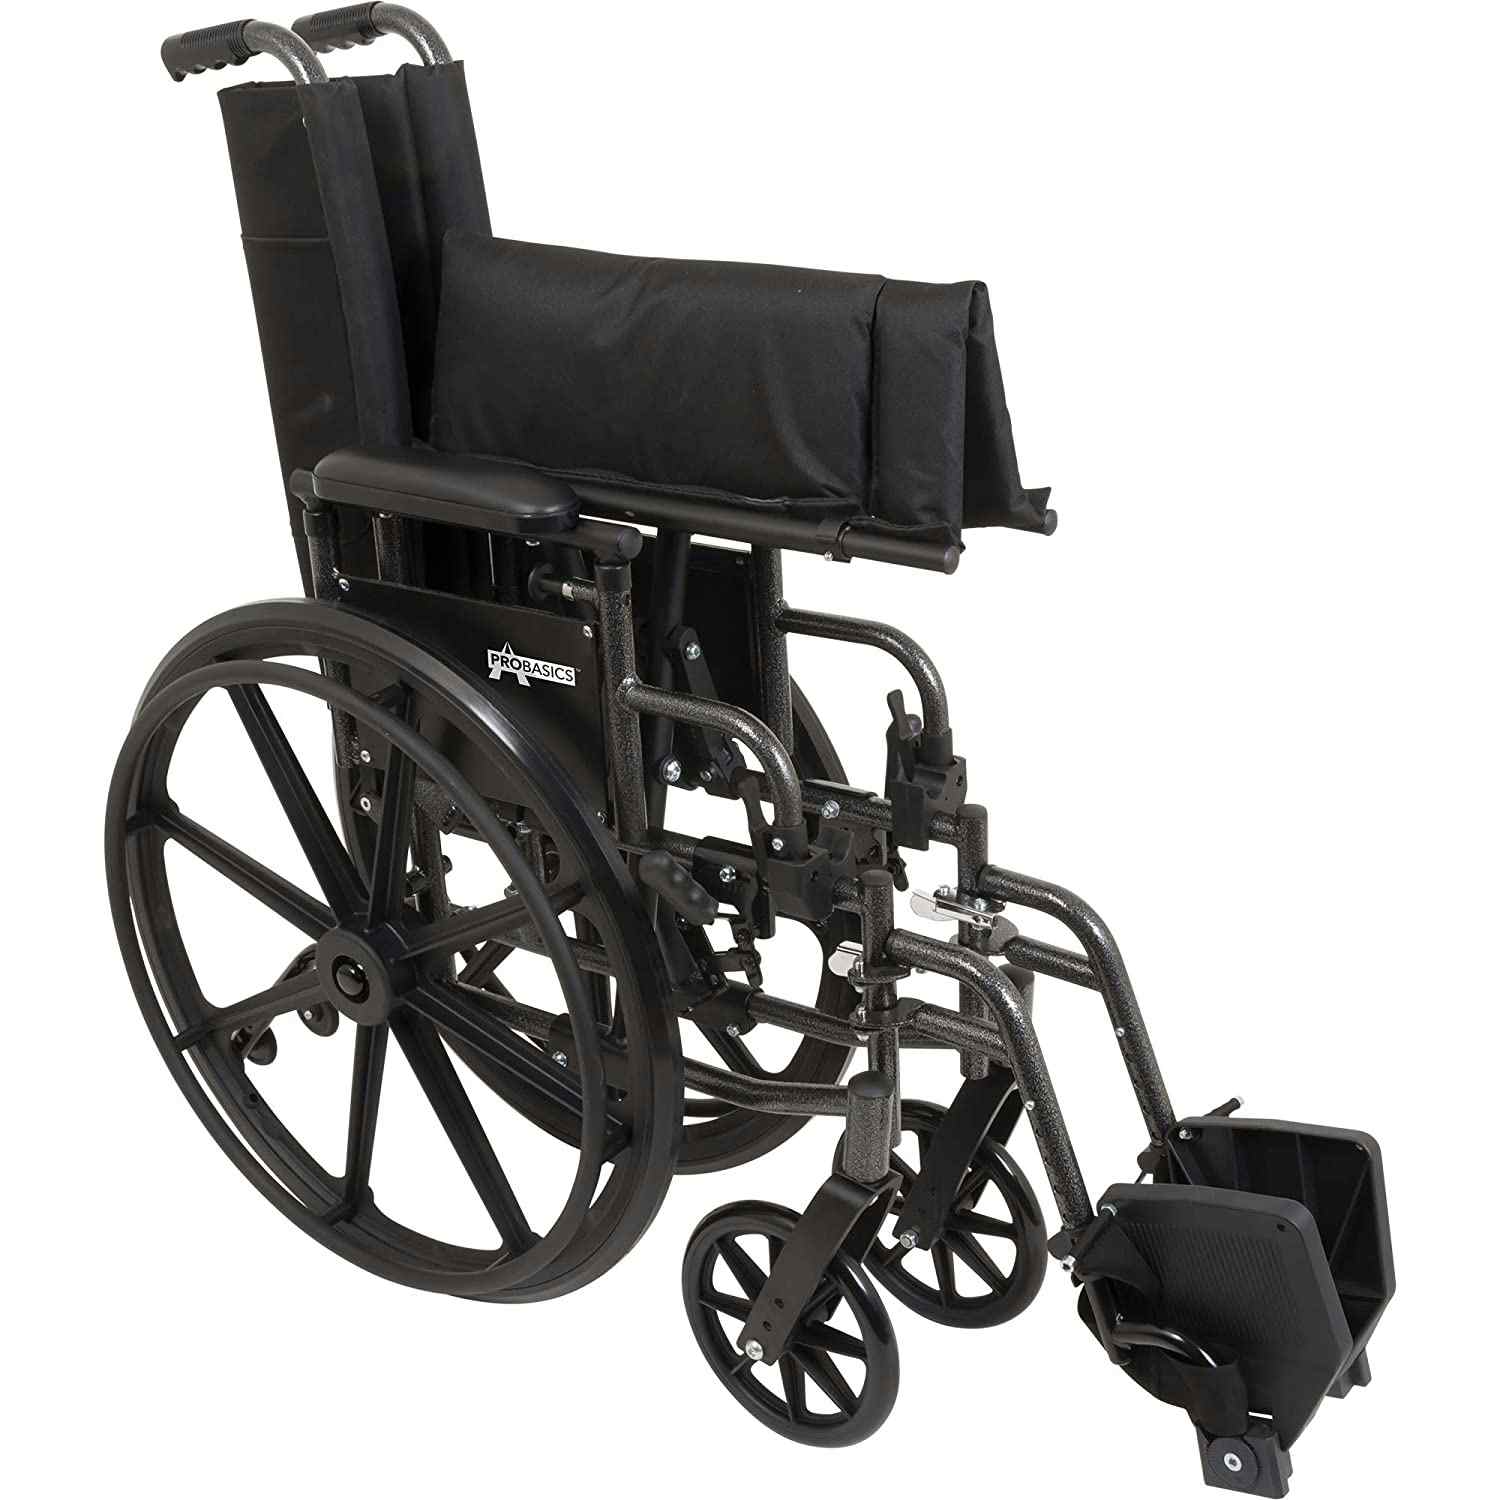 ProBasics K4 High Strength Wheelchair, Lightweight, Flip-back Padded Armrests, Swing-Away Footrests, WC41616DS, 16" - 1 Each